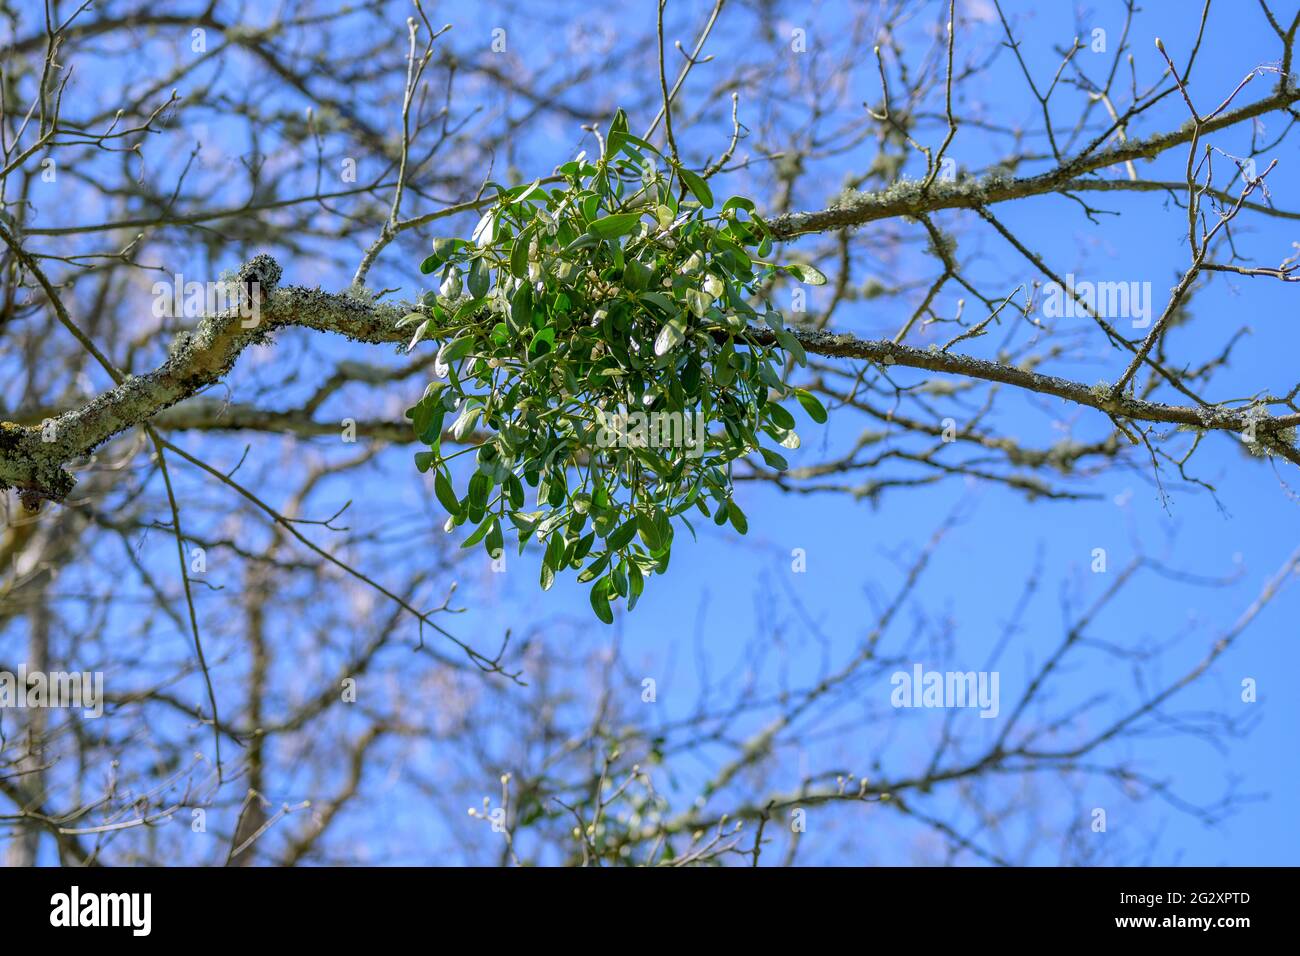 Bunch of Mistletoe in winter, an obligate hemiparasitic plant in the order Santalales, attached to a host tree from which it draws nutrients Stock Photo